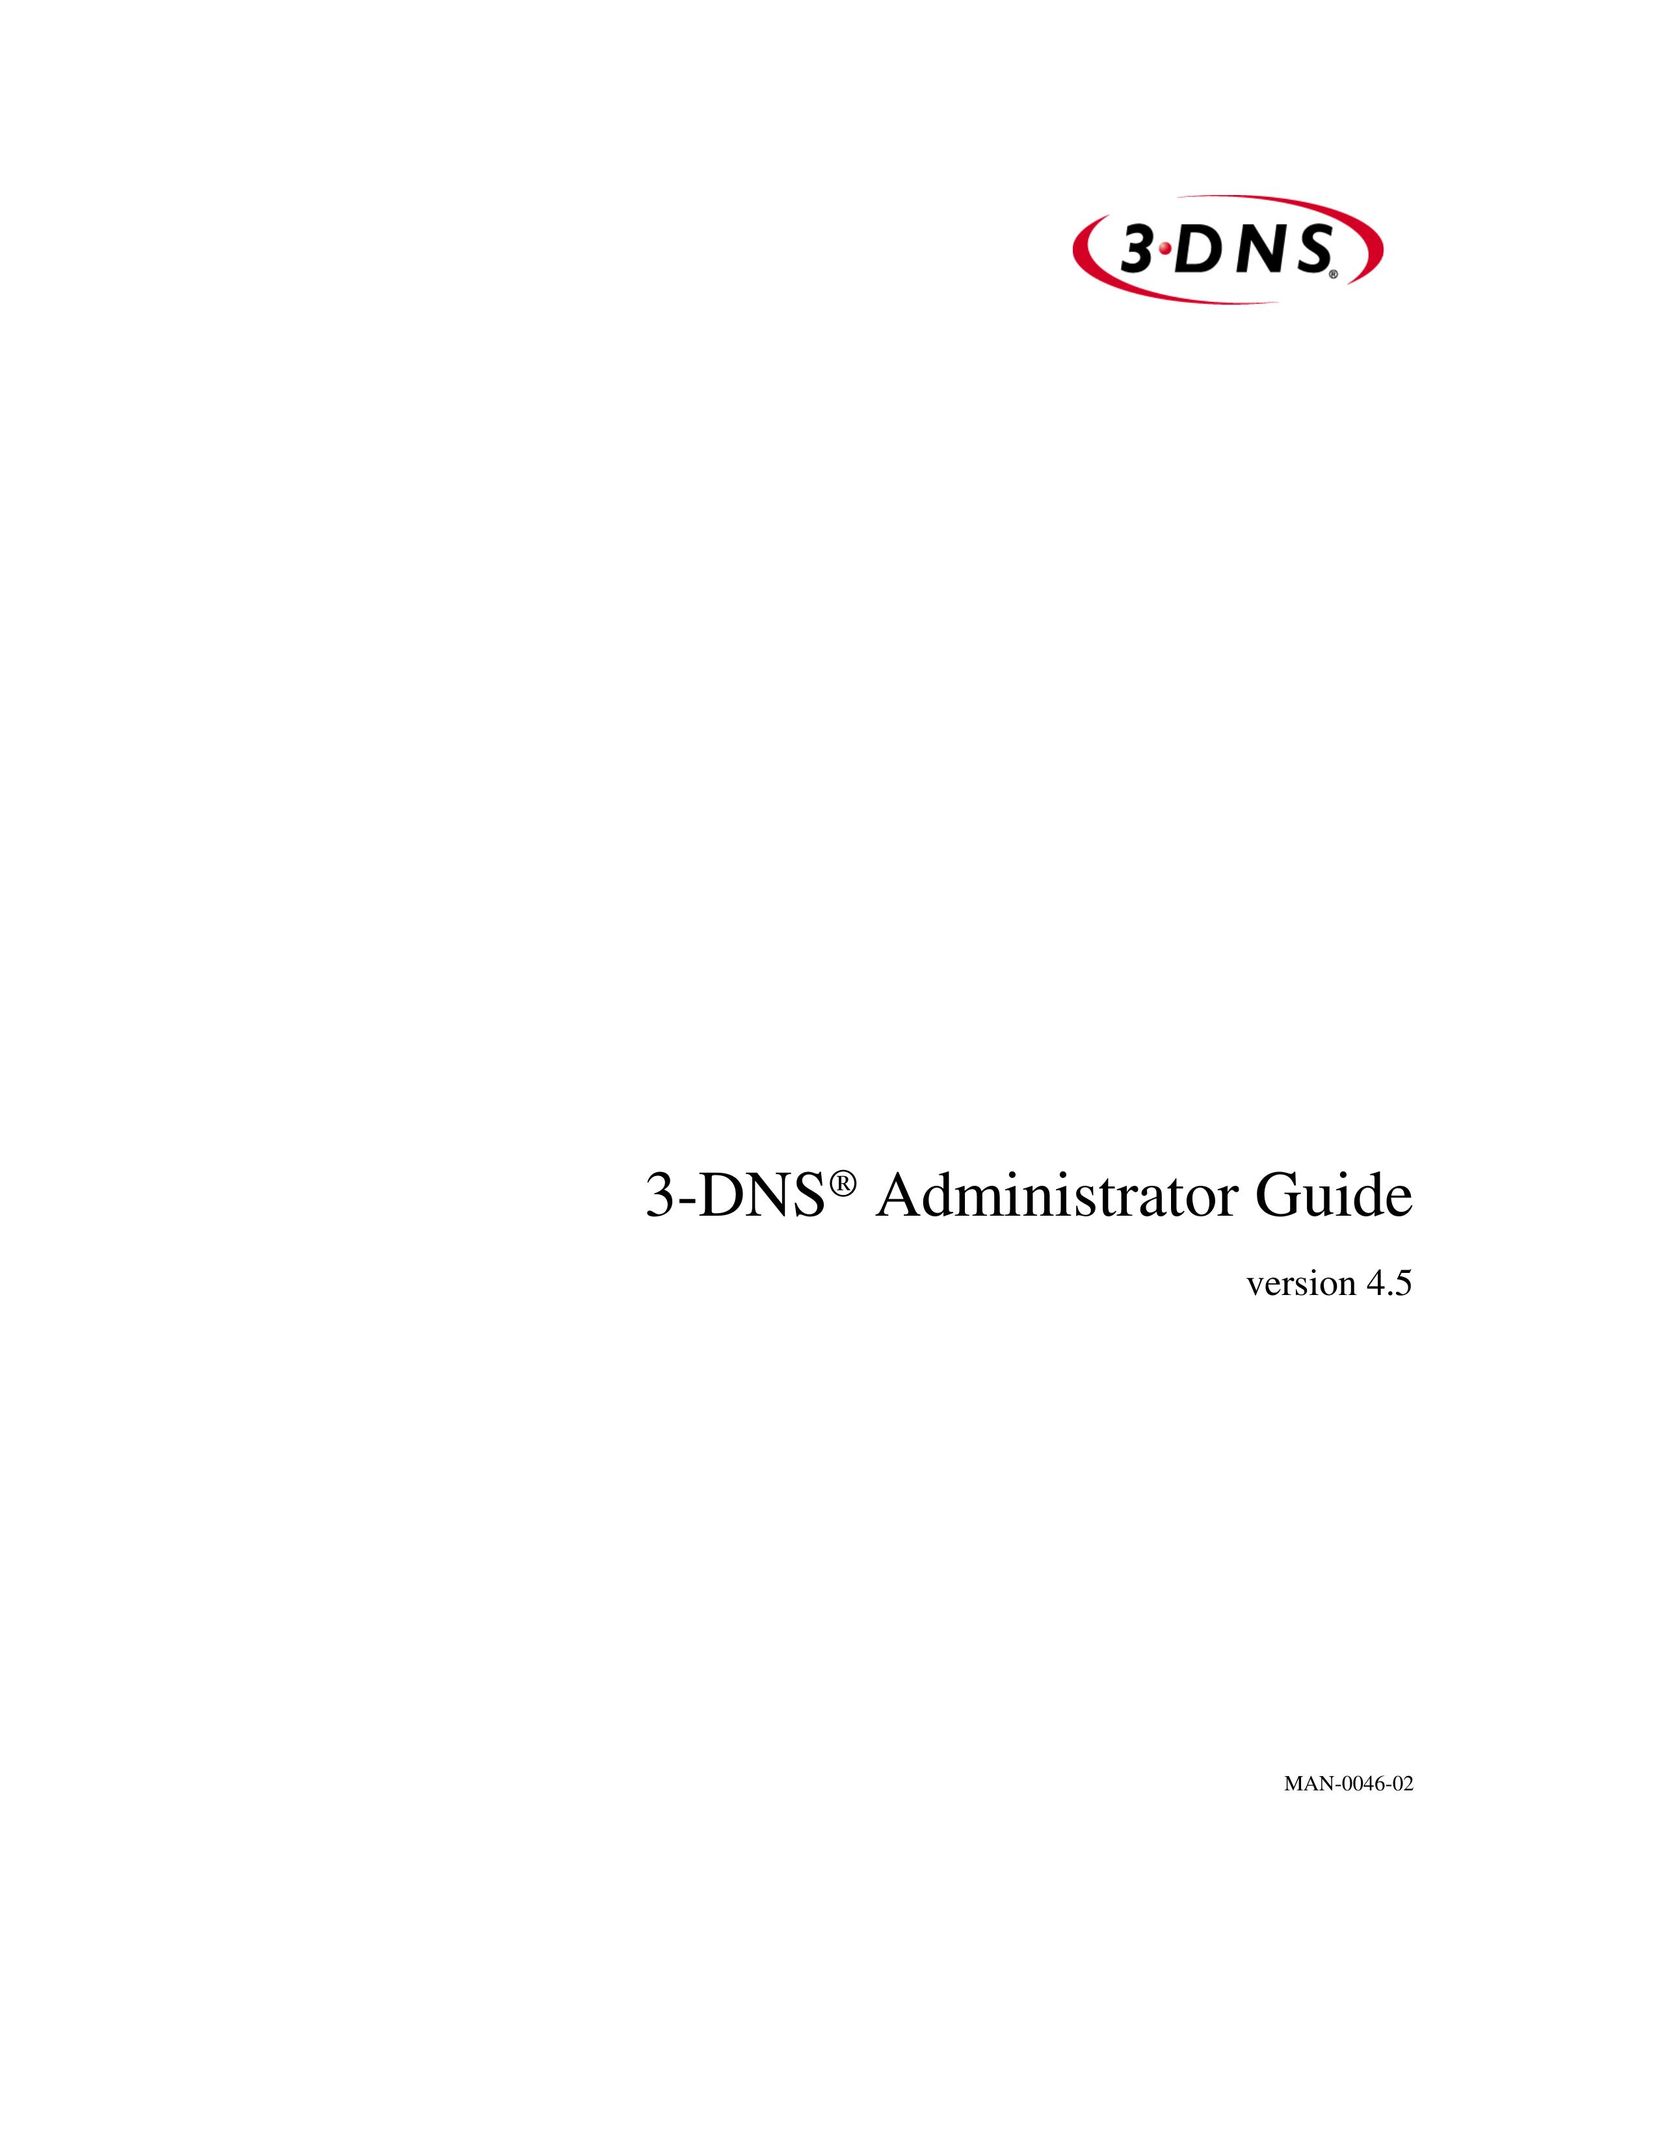 Dell 3-DNS Network Router User Manual